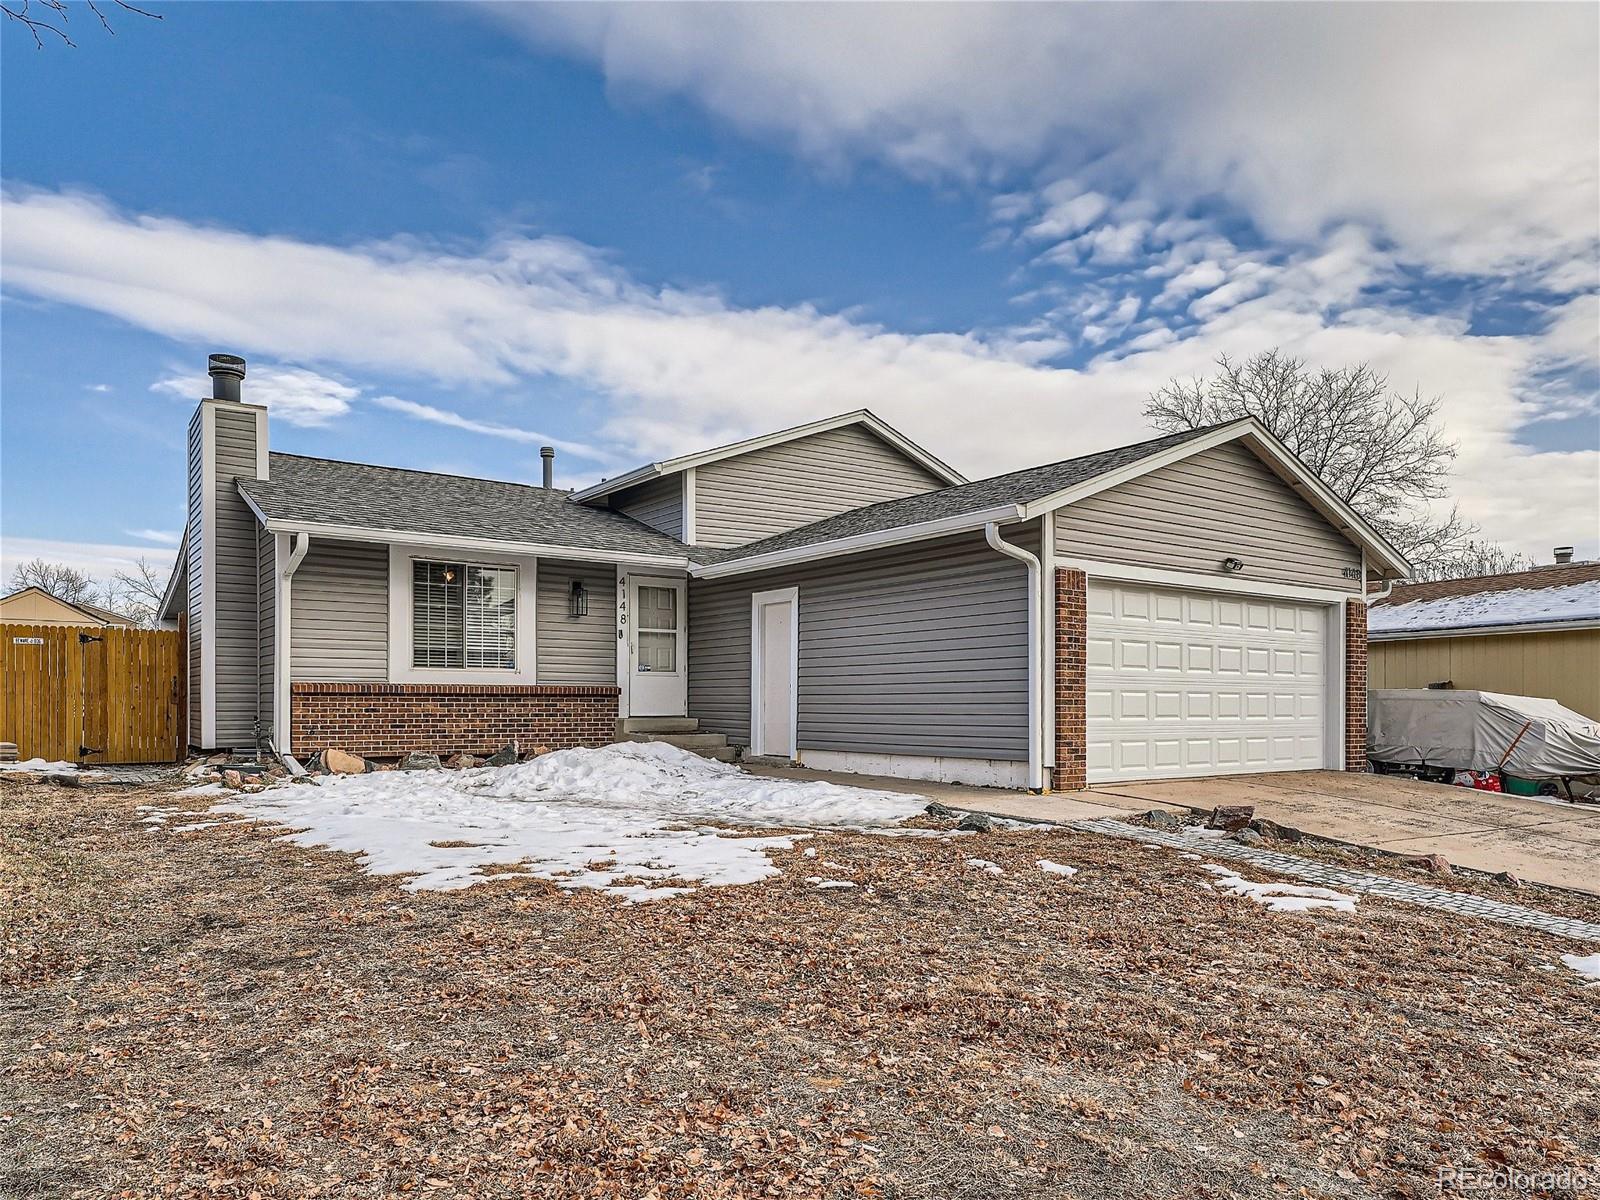 4148 S Ouray Way, aurora MLS: 6978356 Beds: 4 Baths: 2 Price: $495,000